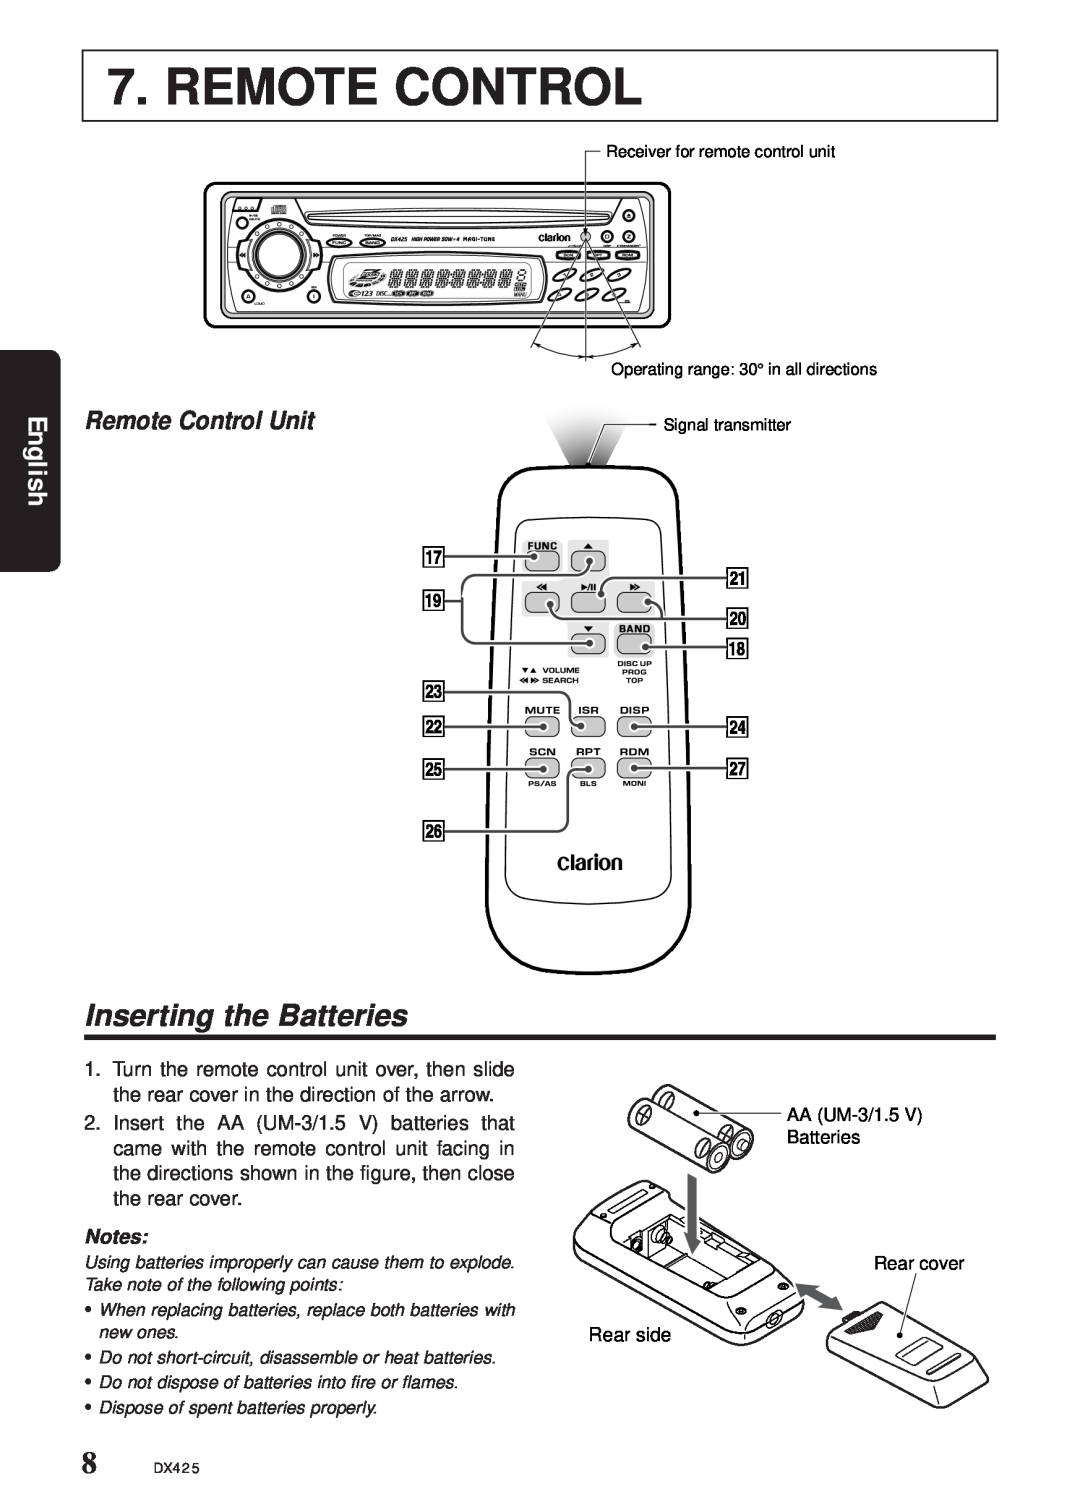 Clarion DX425 owner manual Inserting the Batteries, Remote Control Unit, English, £ ª ¢ 